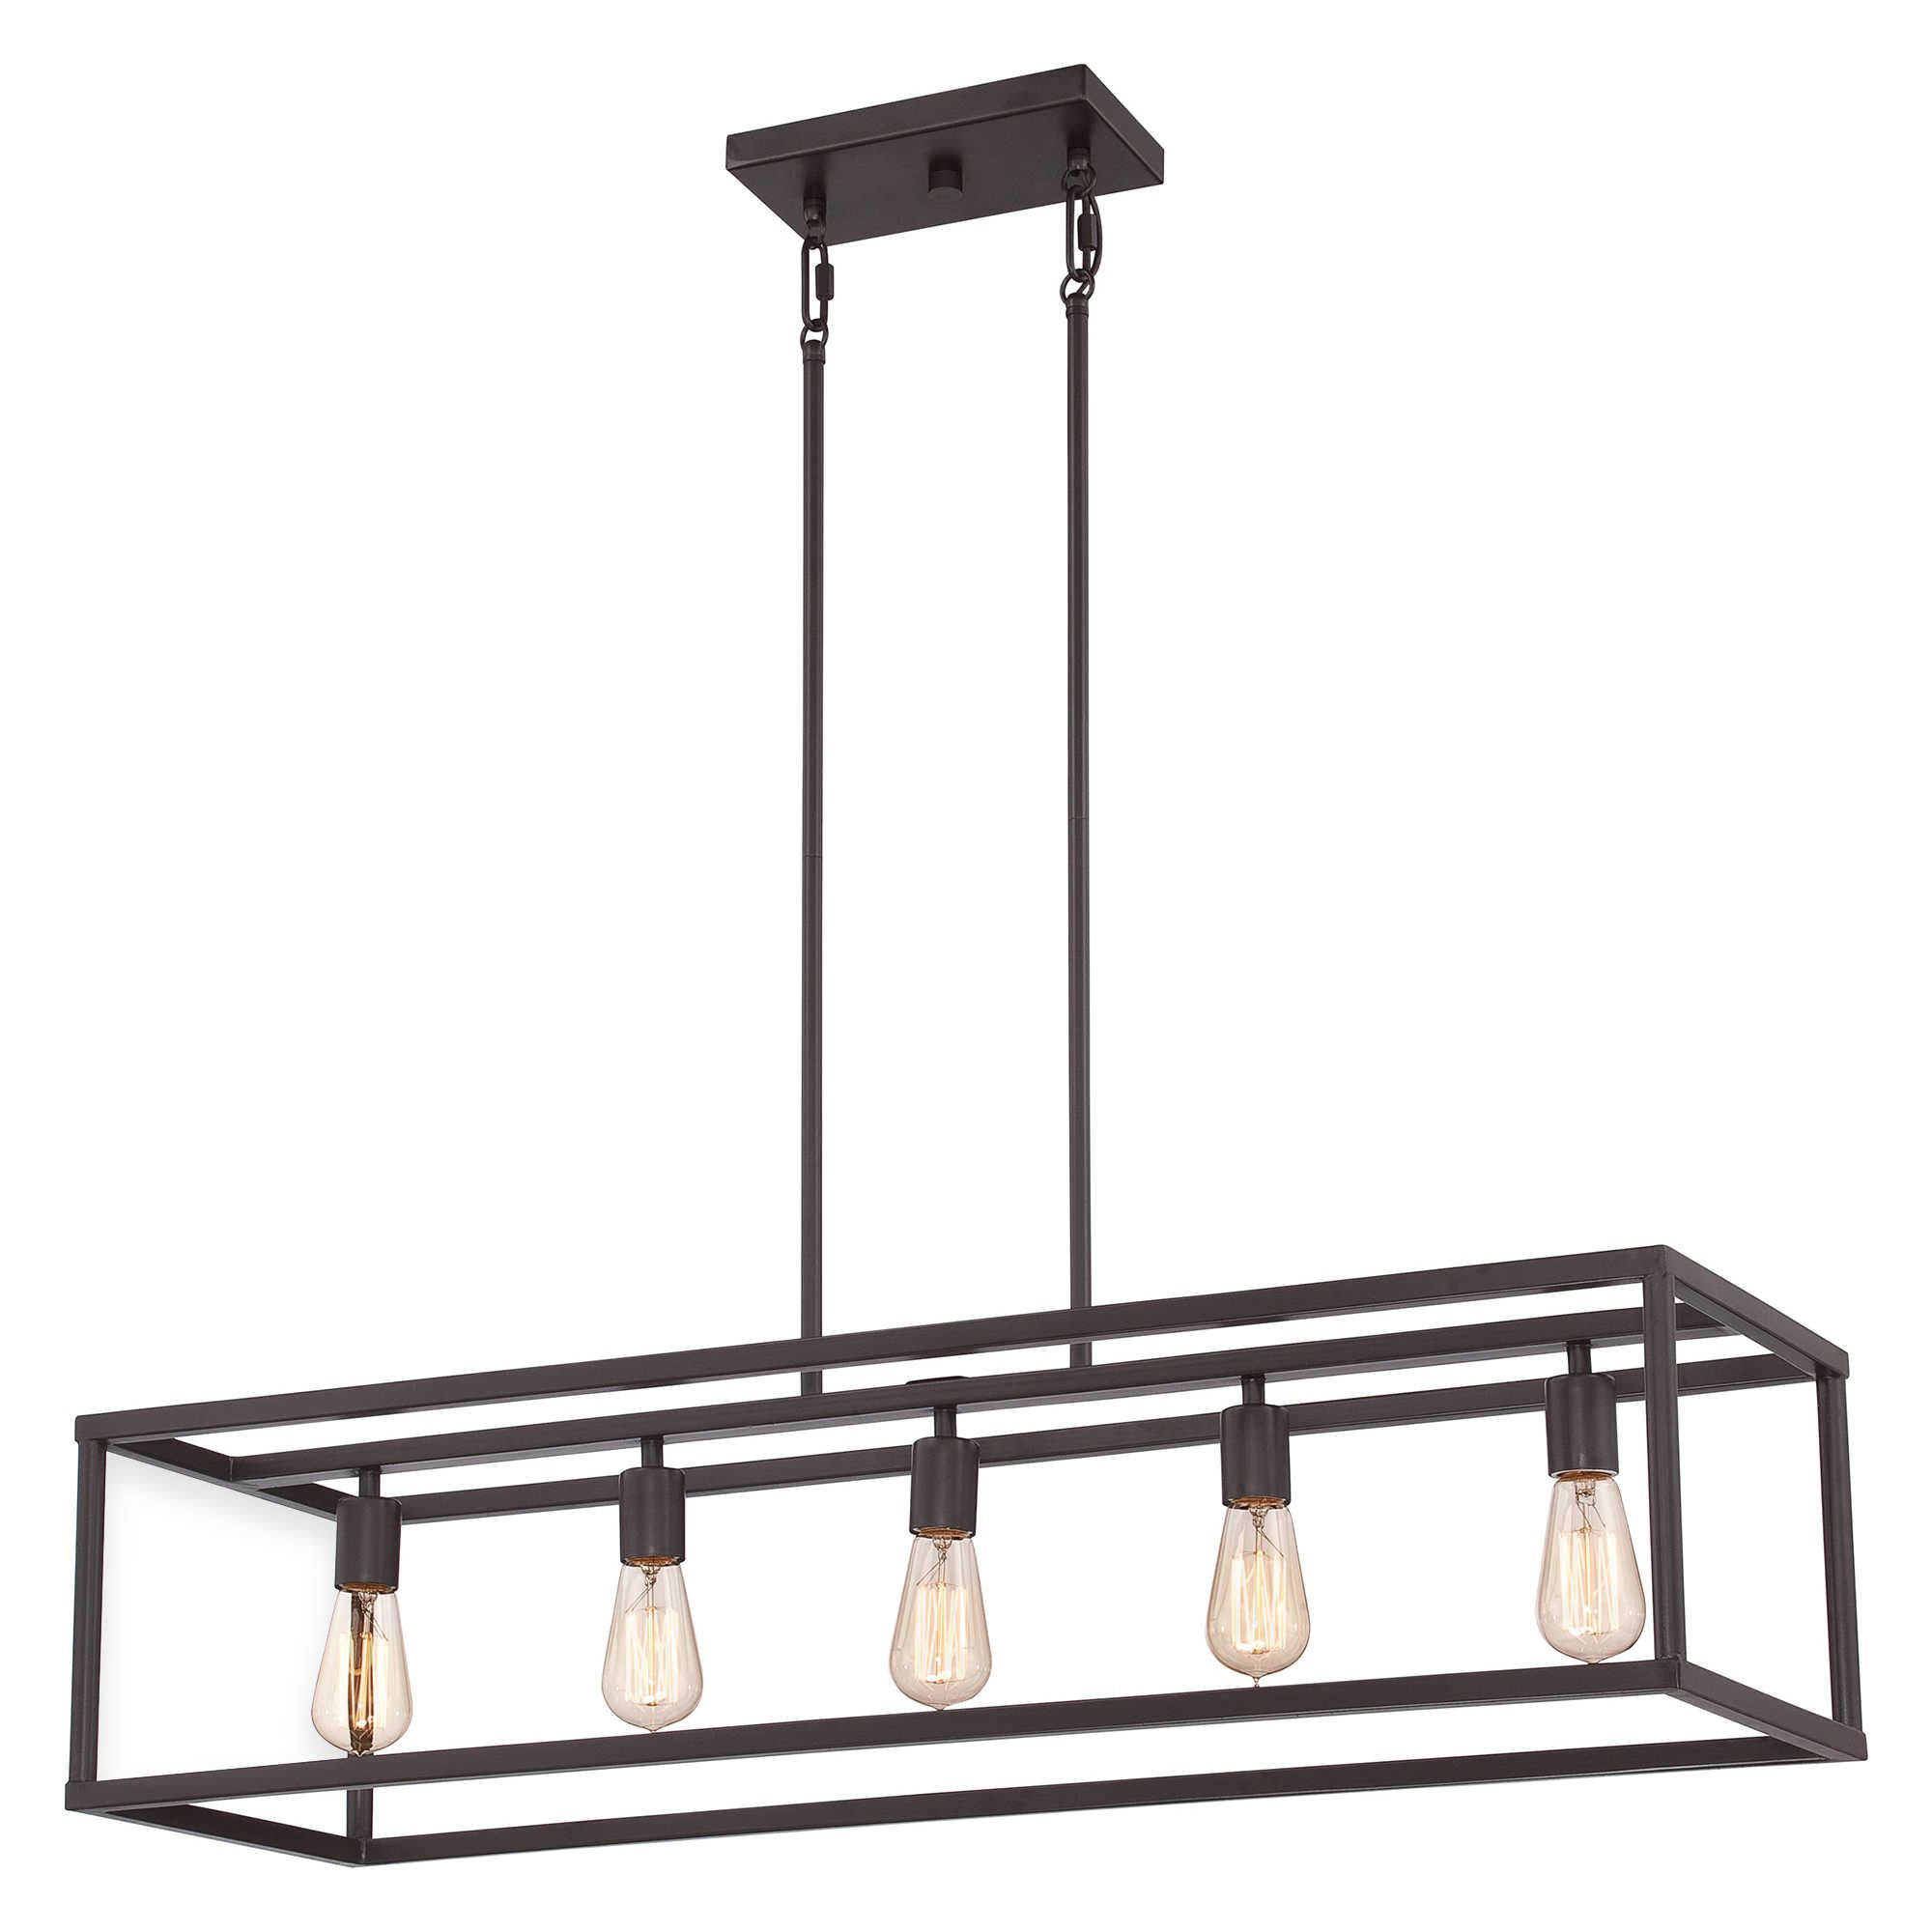 Quoizel New Harbor 5 Light Ceiling Mount Island Chandelier Pertaining To 2019 Thorne 5 Light Kitchen Island Pendants (View 19 of 25)